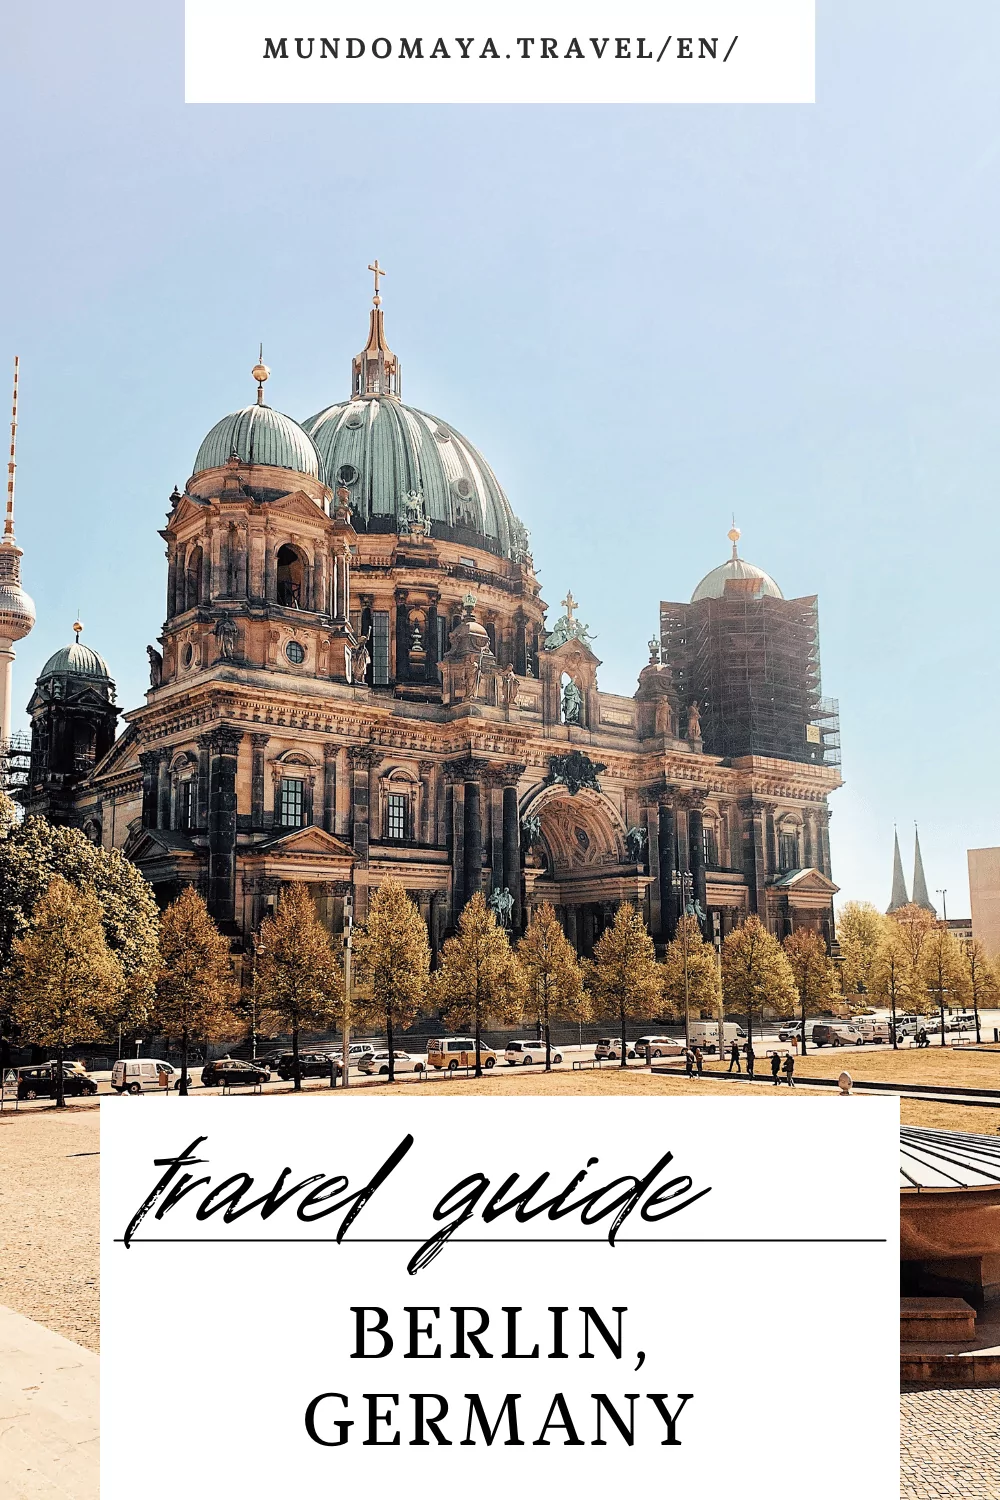 A Complete Guide to Exploring Berlin’s Top Attractions